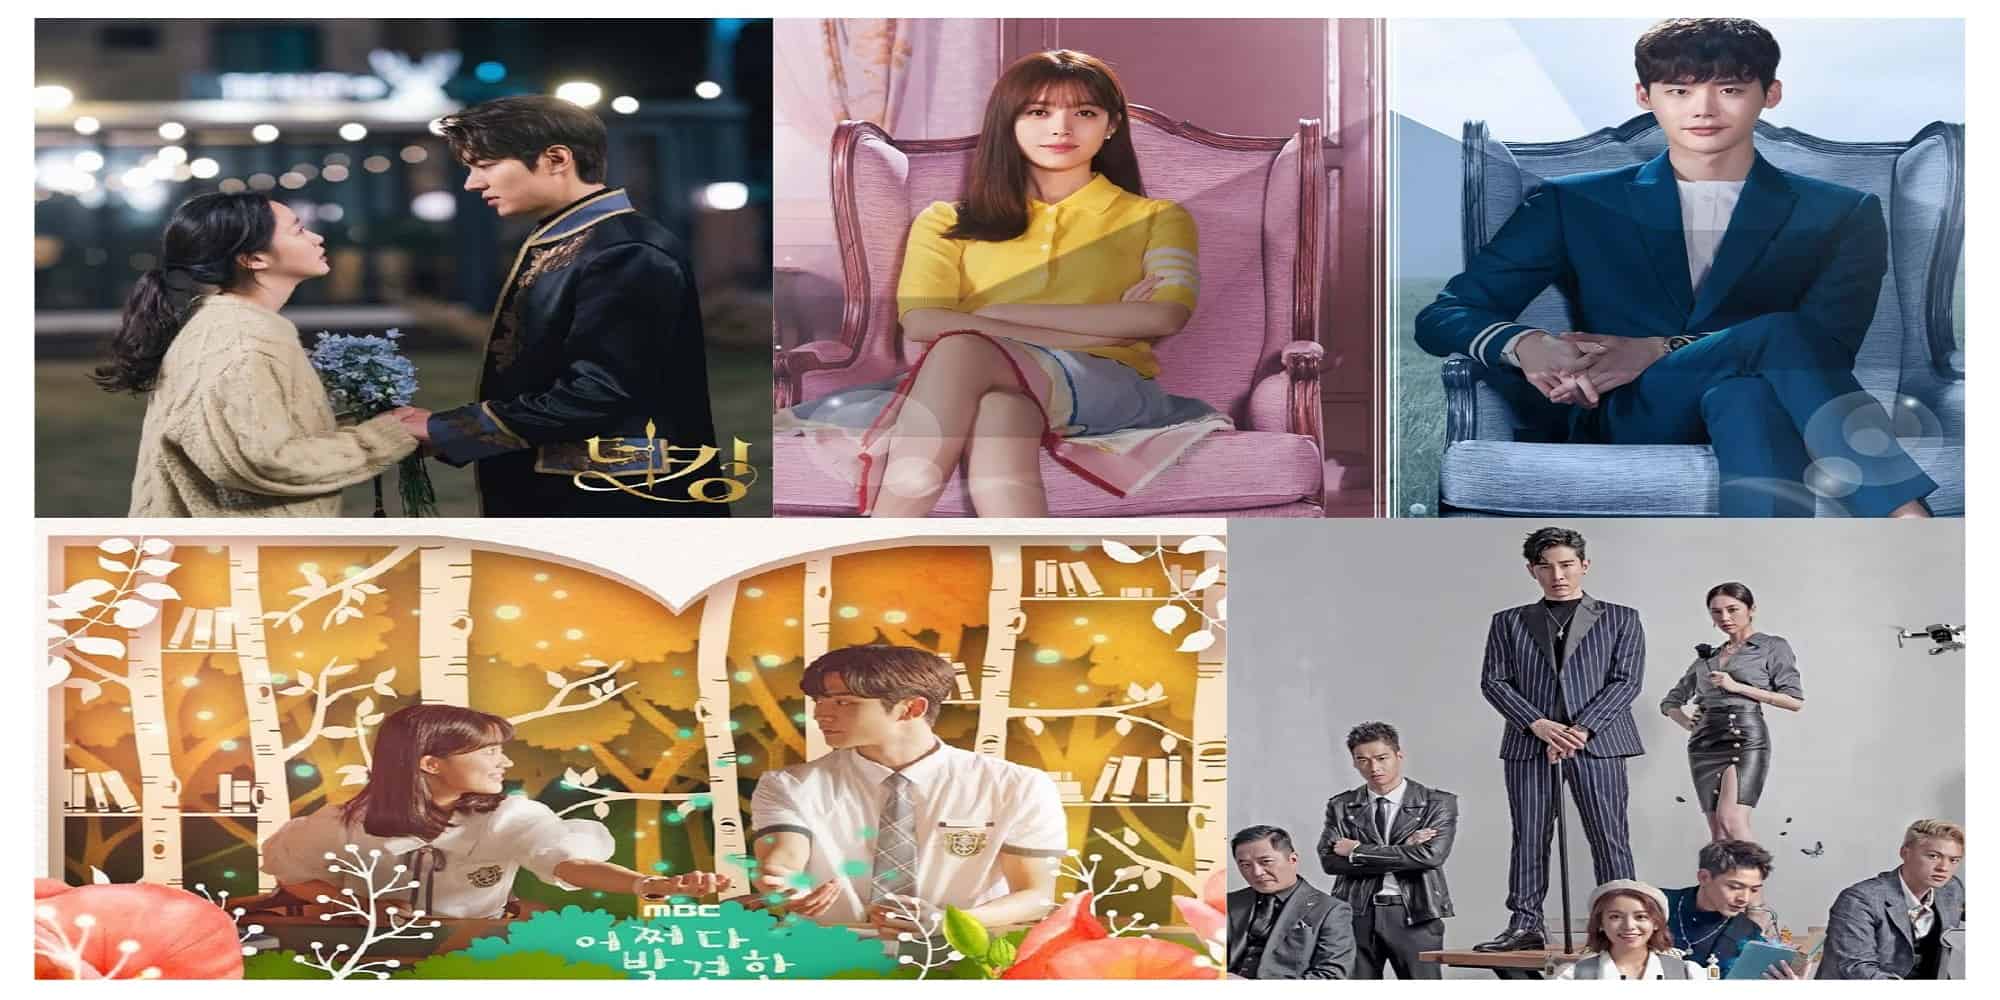 13 TV Dramas like W-Two Worlds (Posters from Left to Right- The King Eternal Monarch, W Two Worlds, Extraordinary You, and Lost Romance)